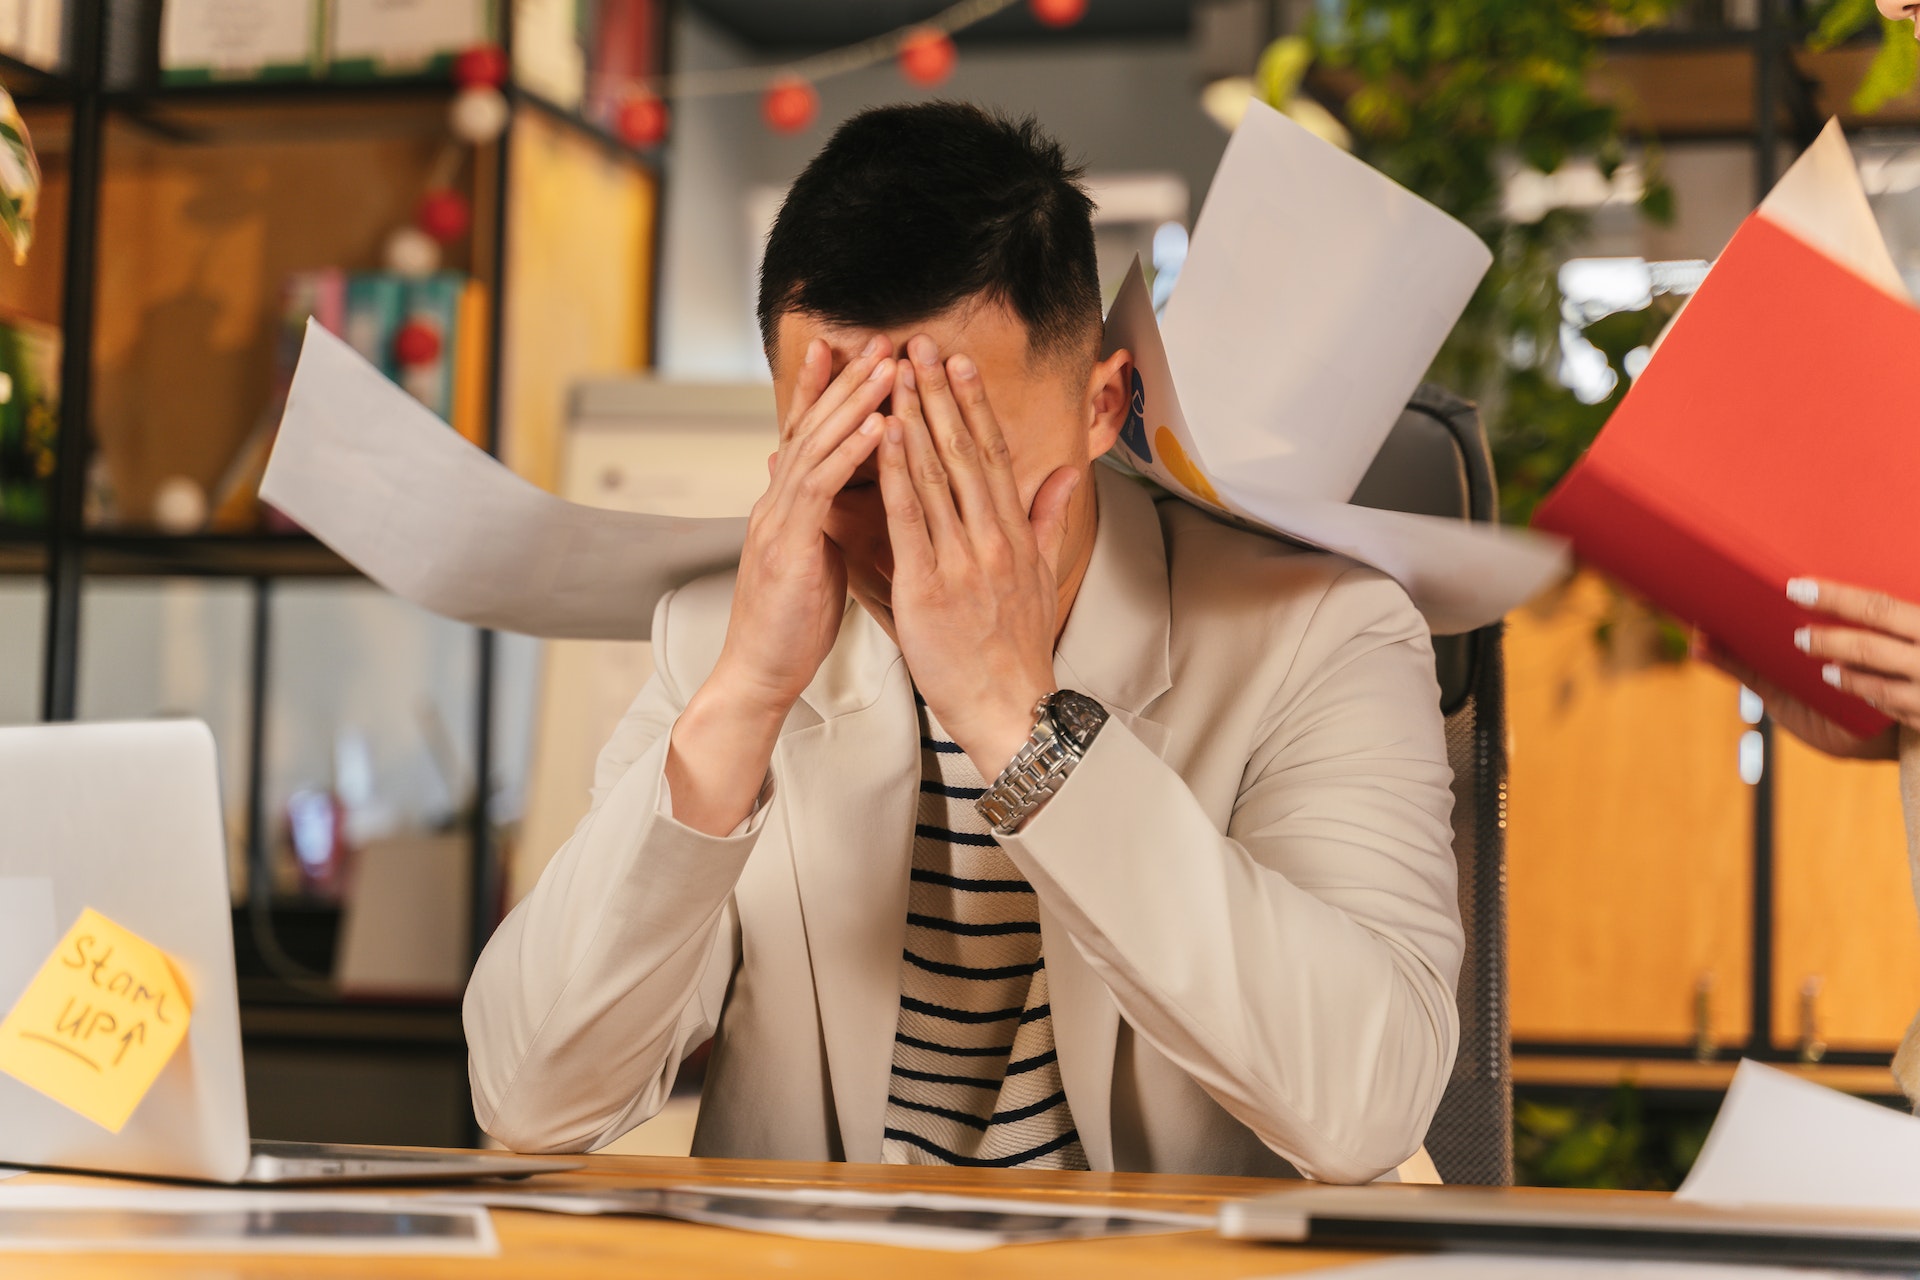 What is work-related stress and what are some of its signs?